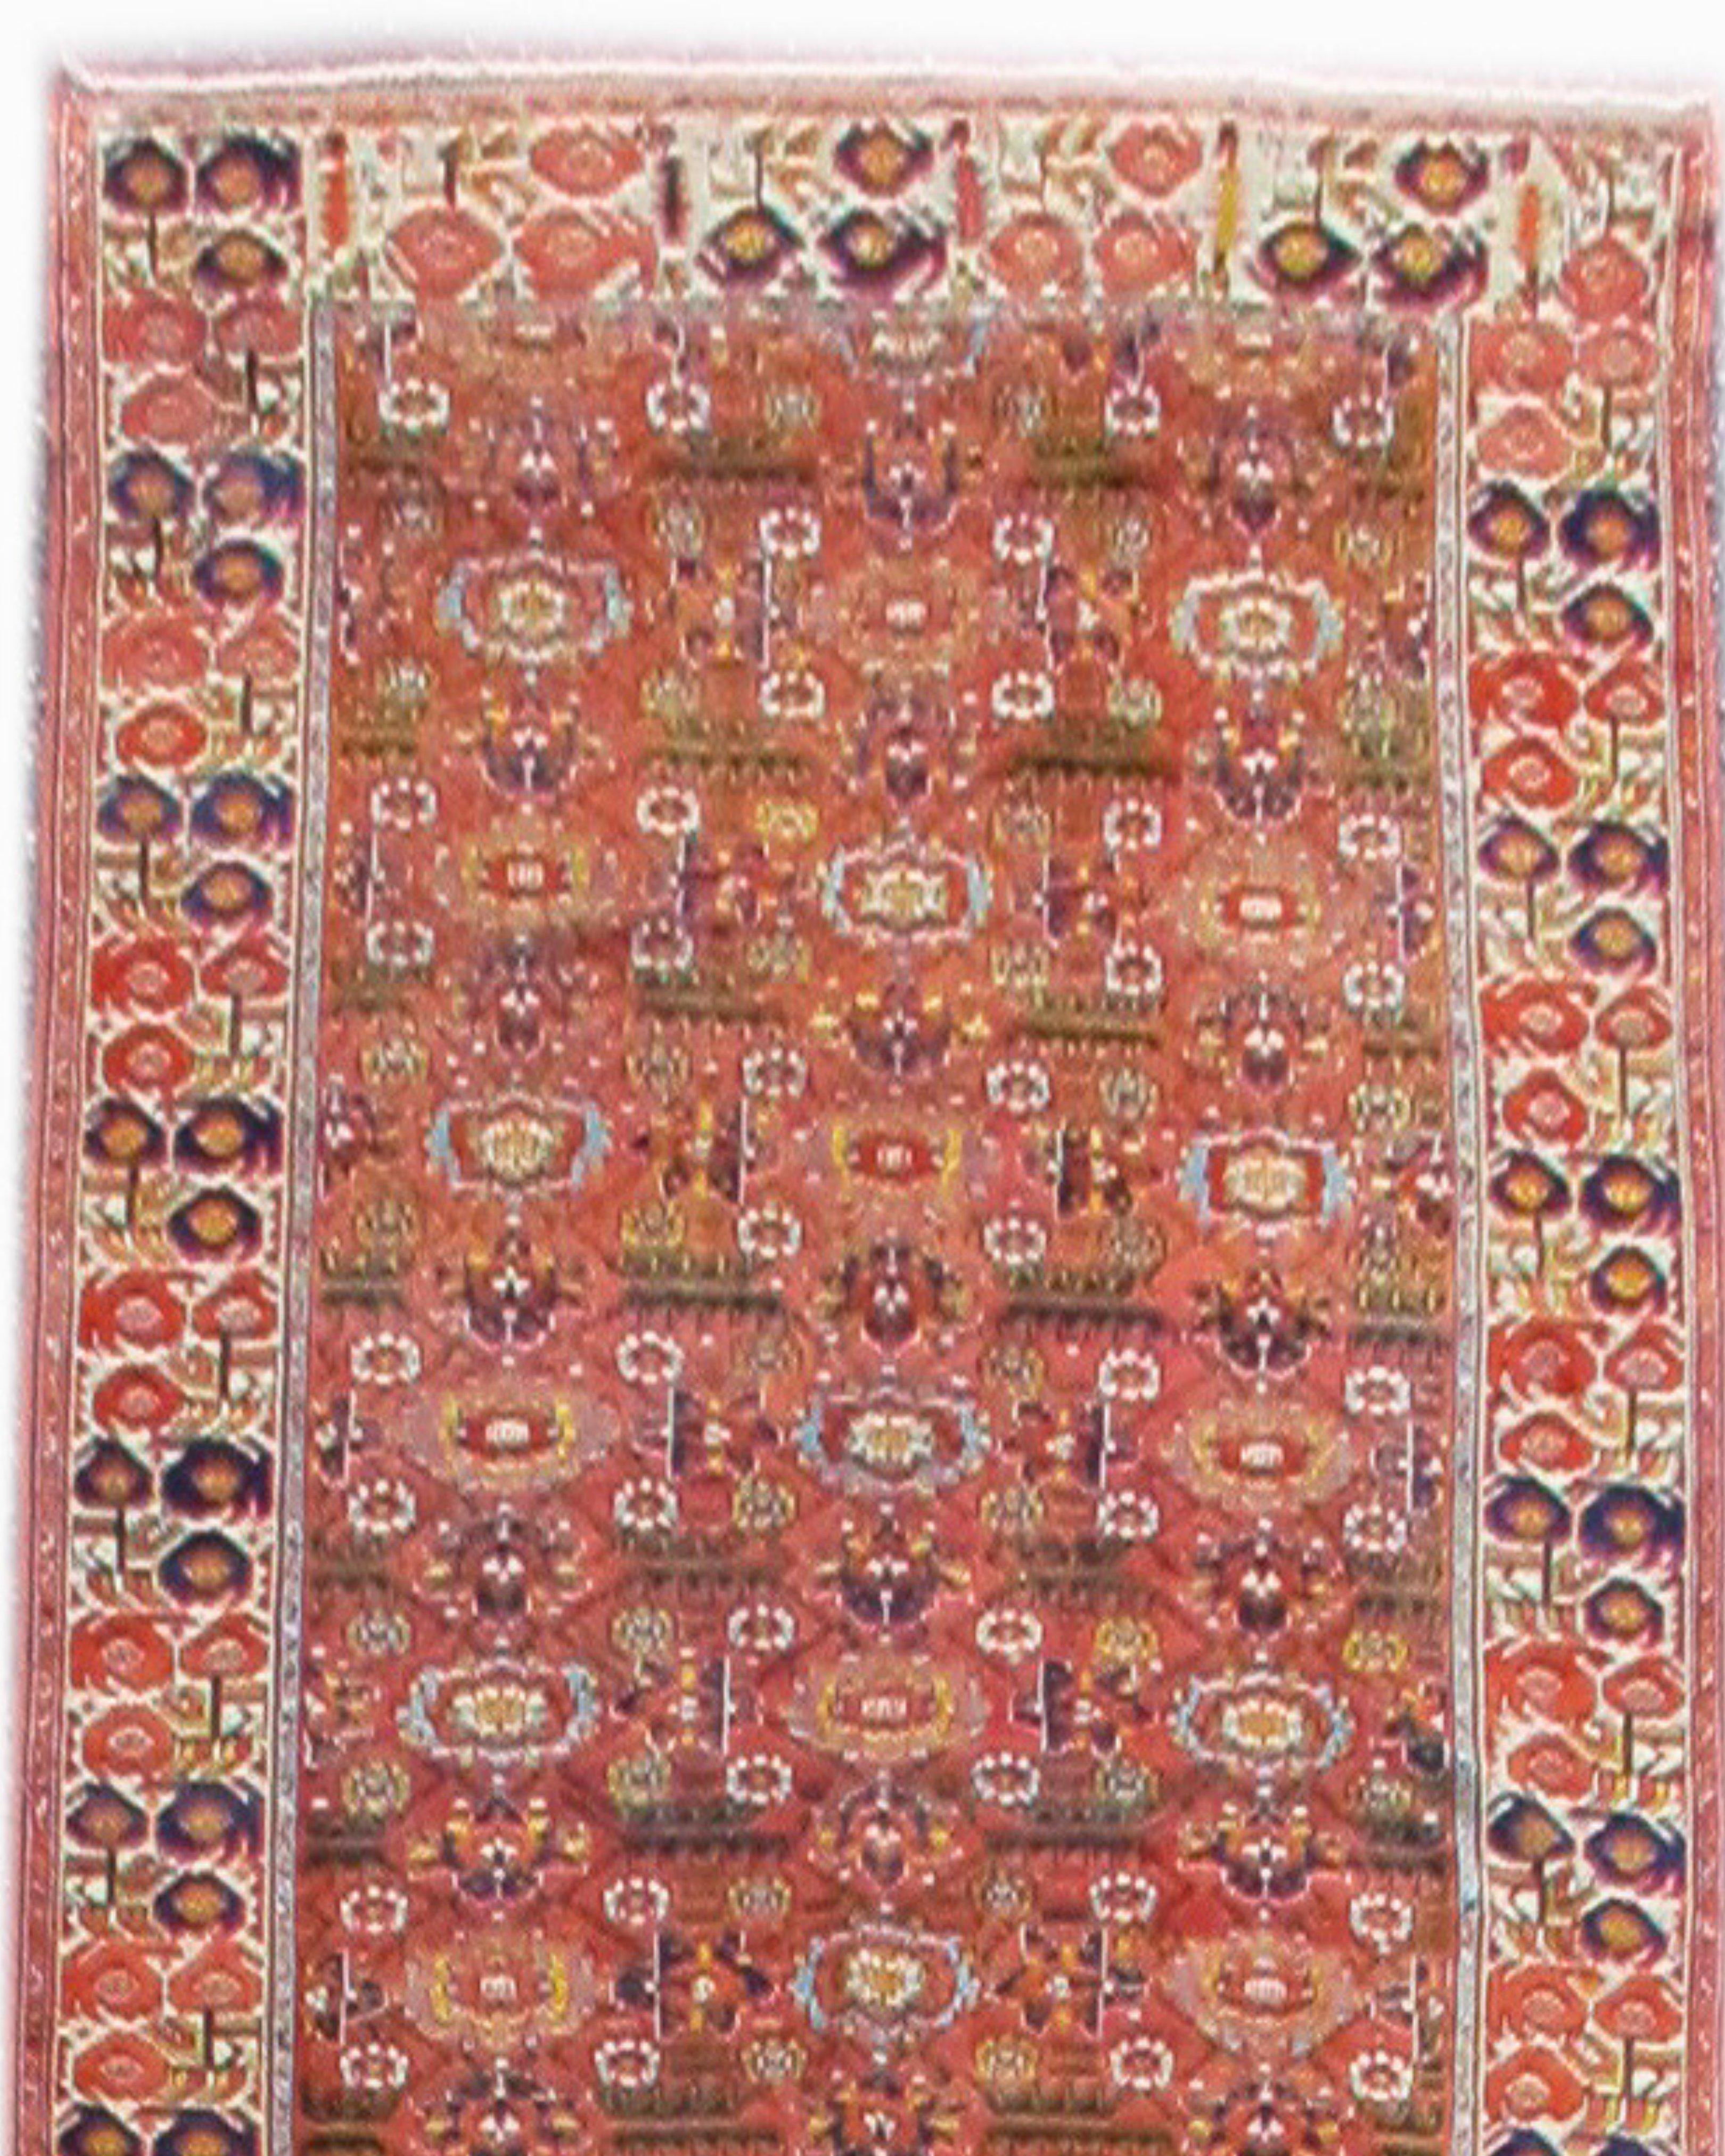 Antique Northwest Persian Long Rug, c. 1900

This palatial corridor carpet matches extraordinary drawing and scale with a vibrant palette of natural vegetable dyes. The field design uses an older and fuller rendition of the classic Persian “Herati